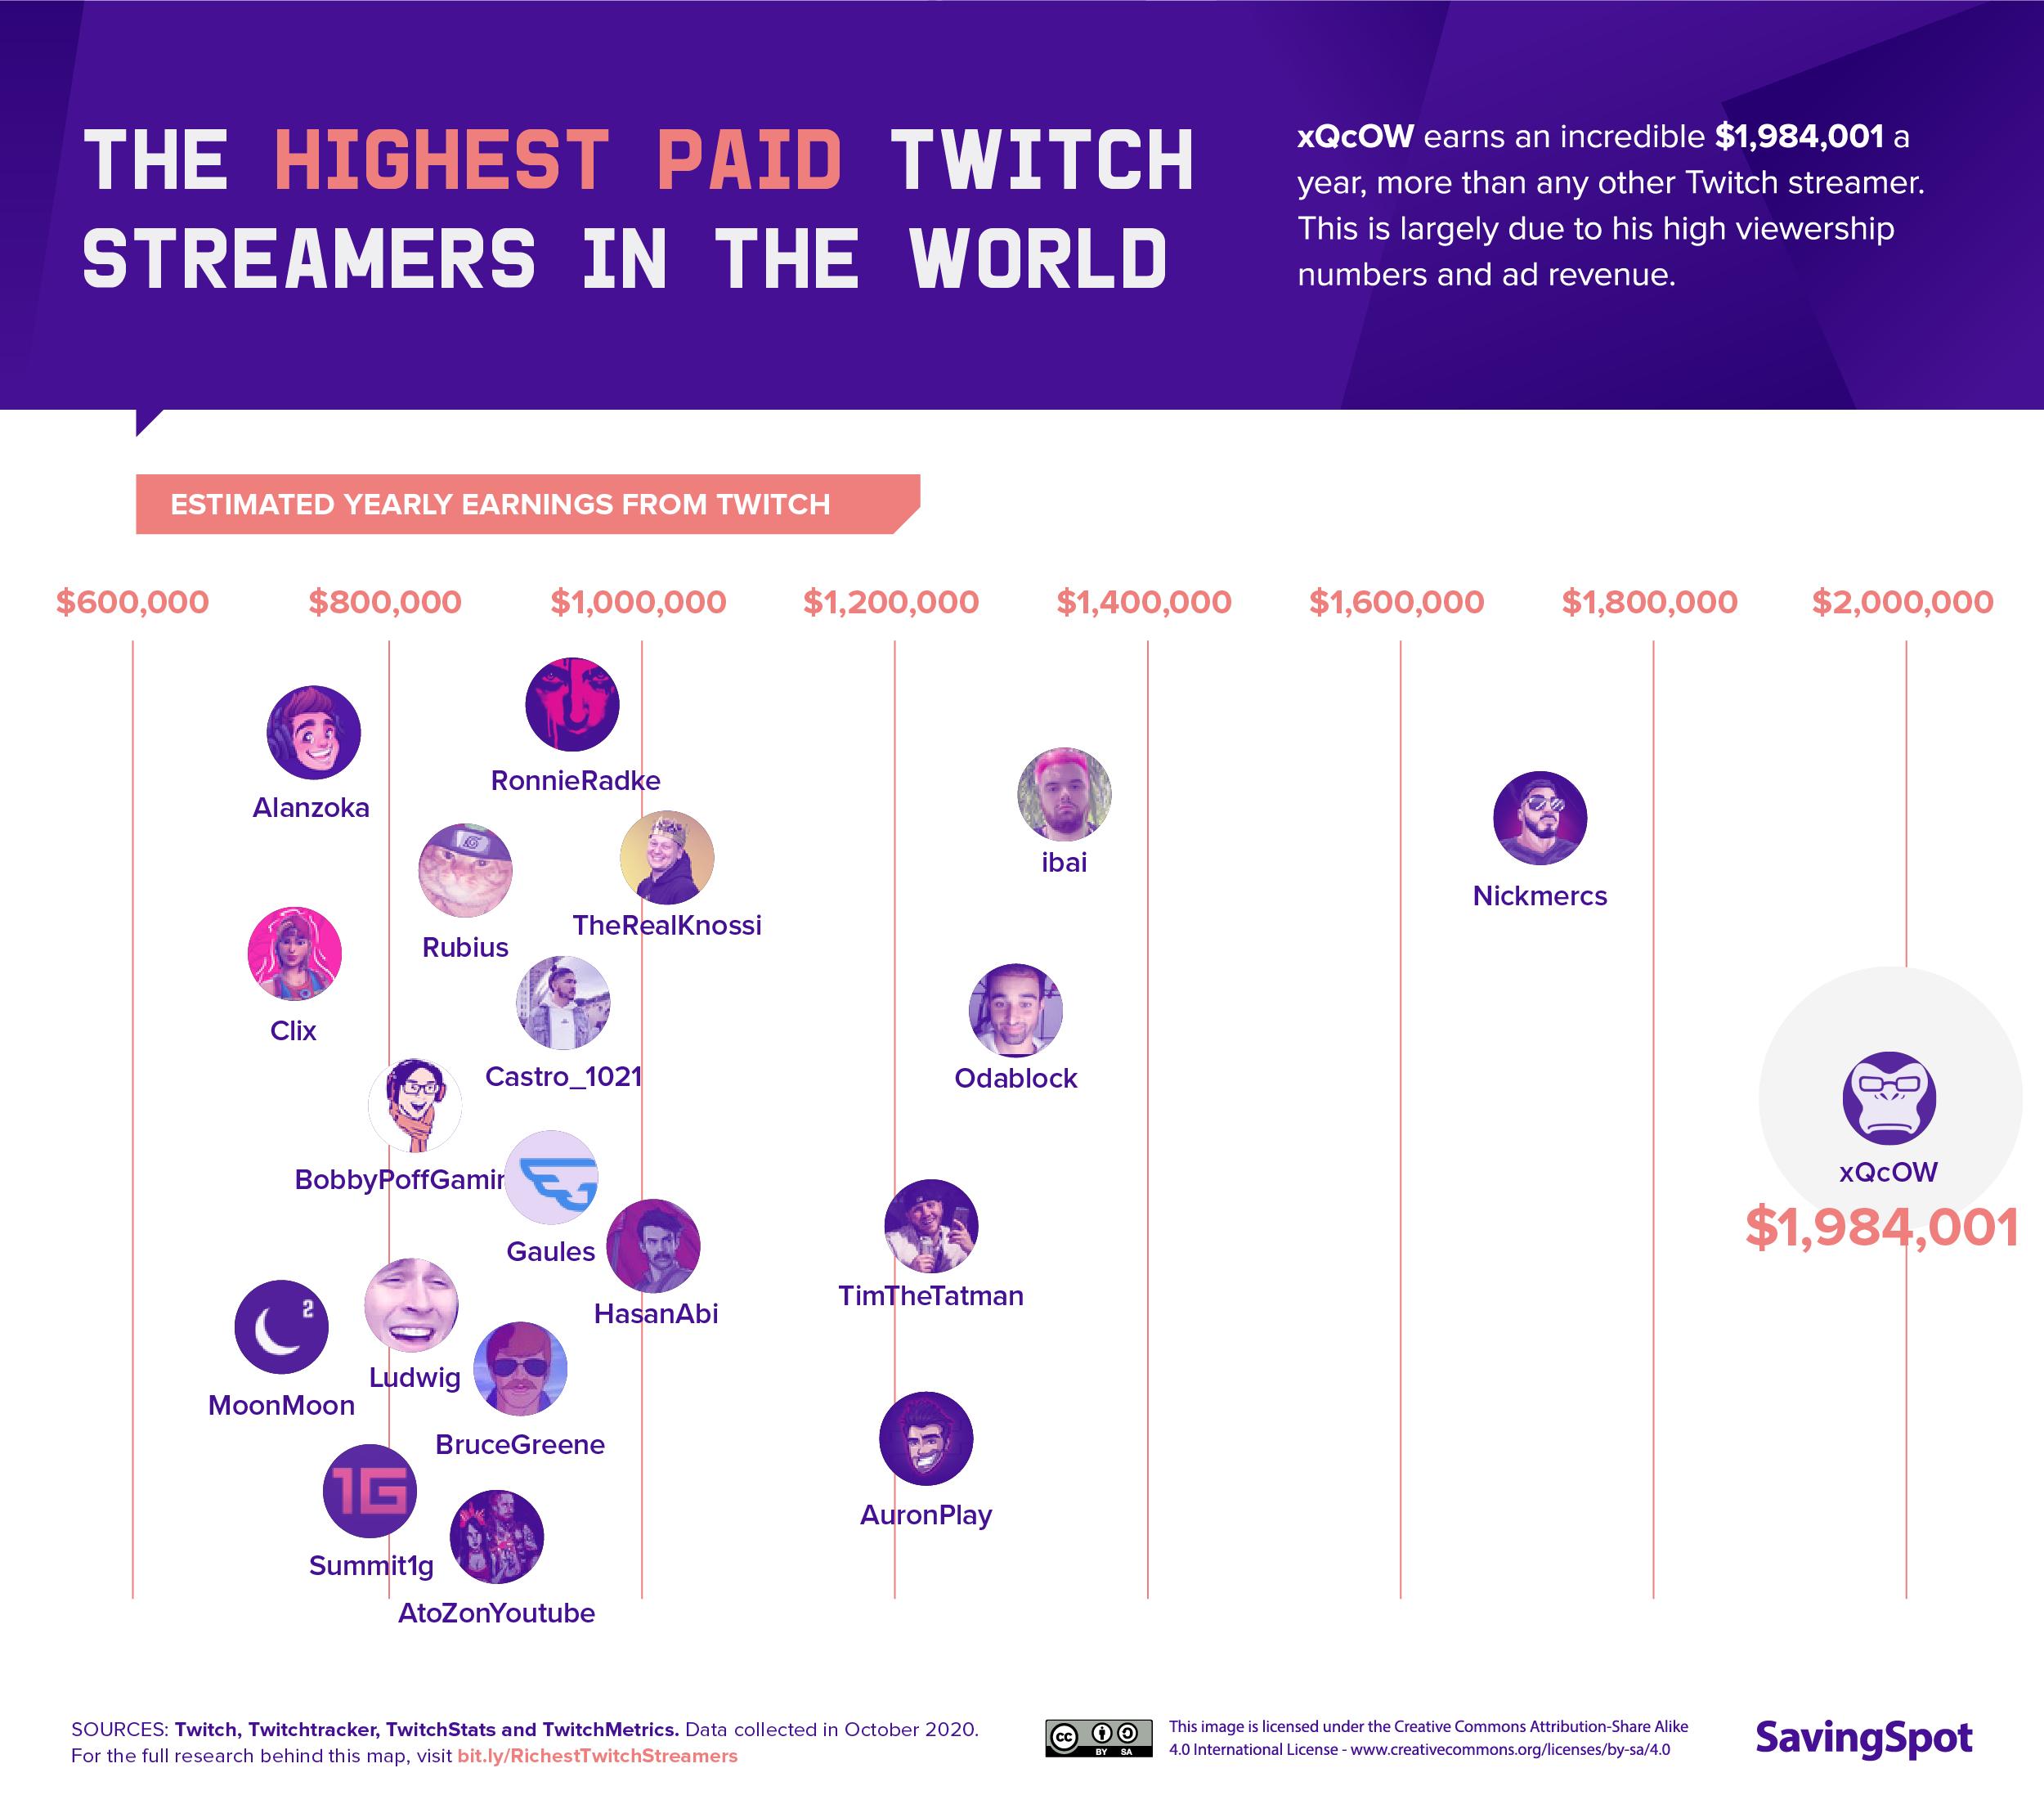 SavingSpot Twitch earnings graphic.